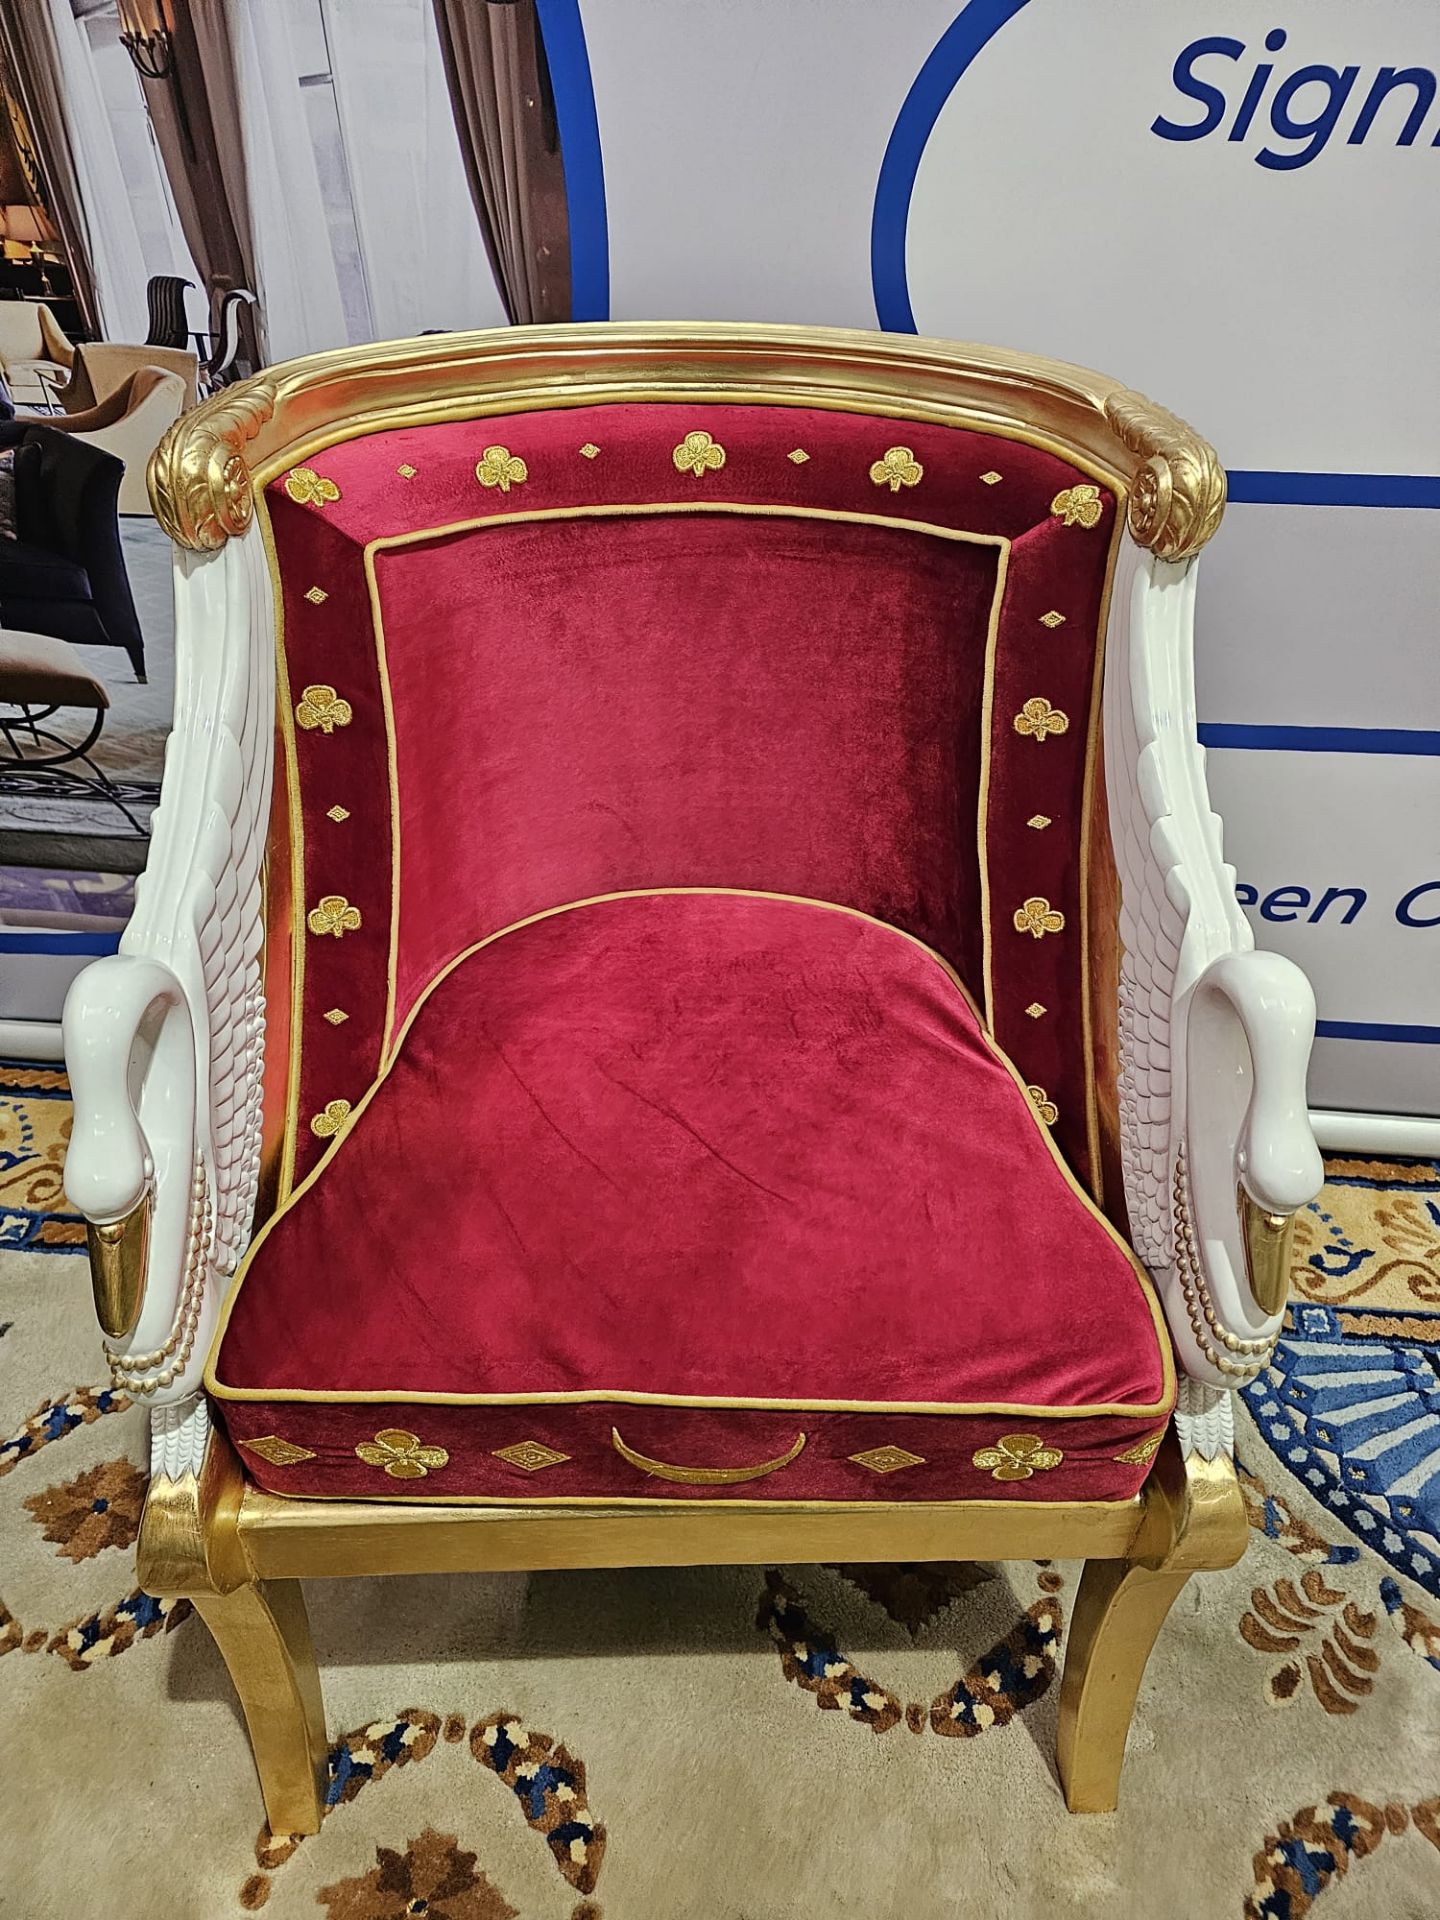 French Empire Style Fauteuil Inspired By The Early 19th Century Designs Of Jacob-Desmalter The - Image 9 of 11